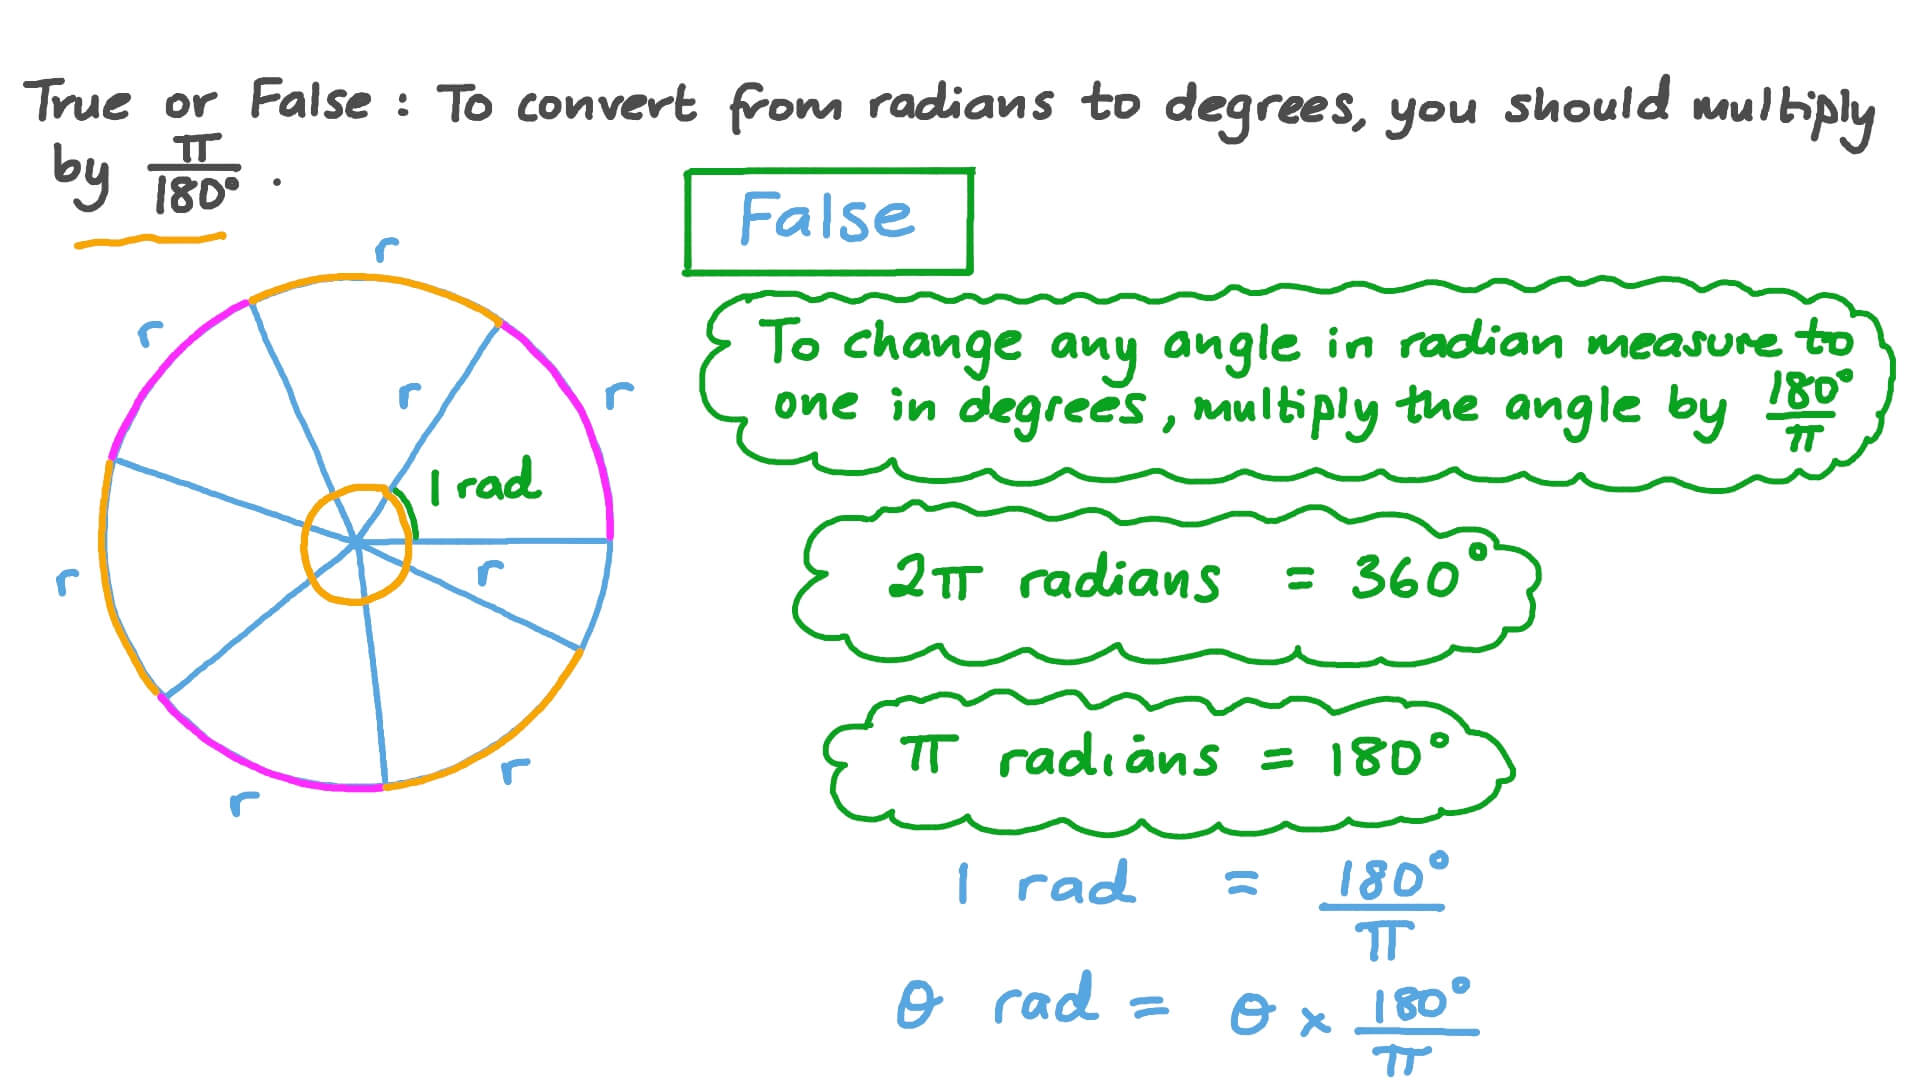 An educational illustration demonstrating the reverse process of converting radians to degrees using the inverse formula.